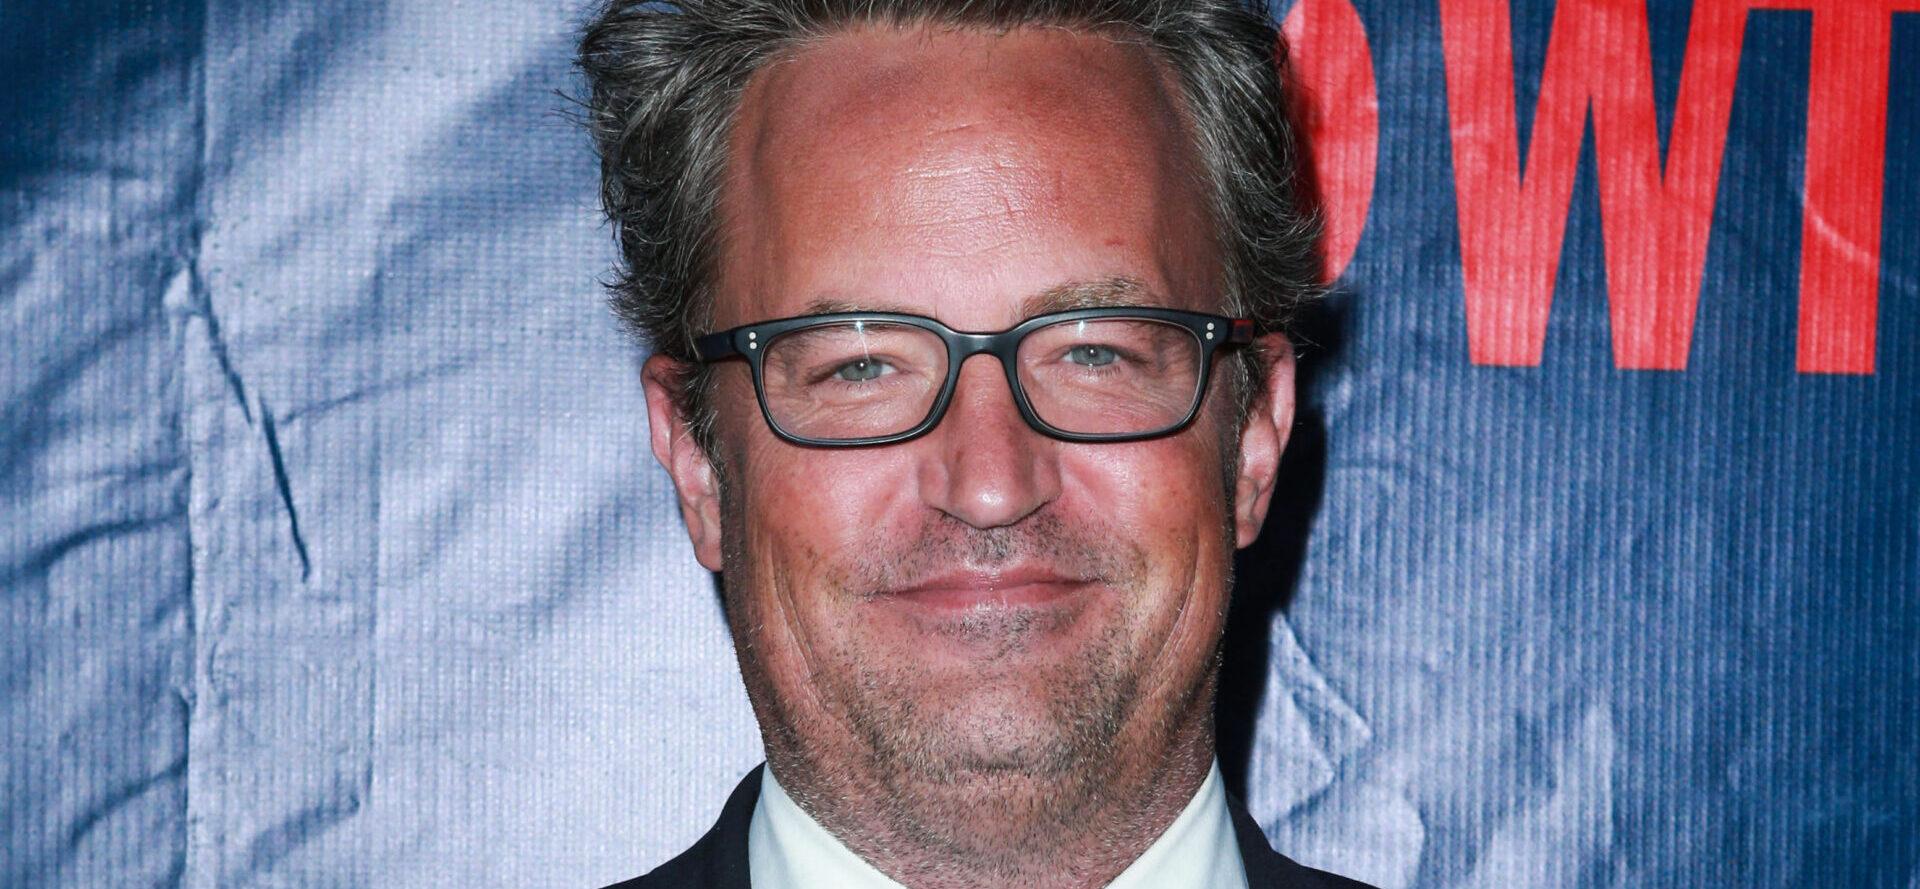 Matthew Perry’s Family Breaks Silence On His ‘Tragic’ Death